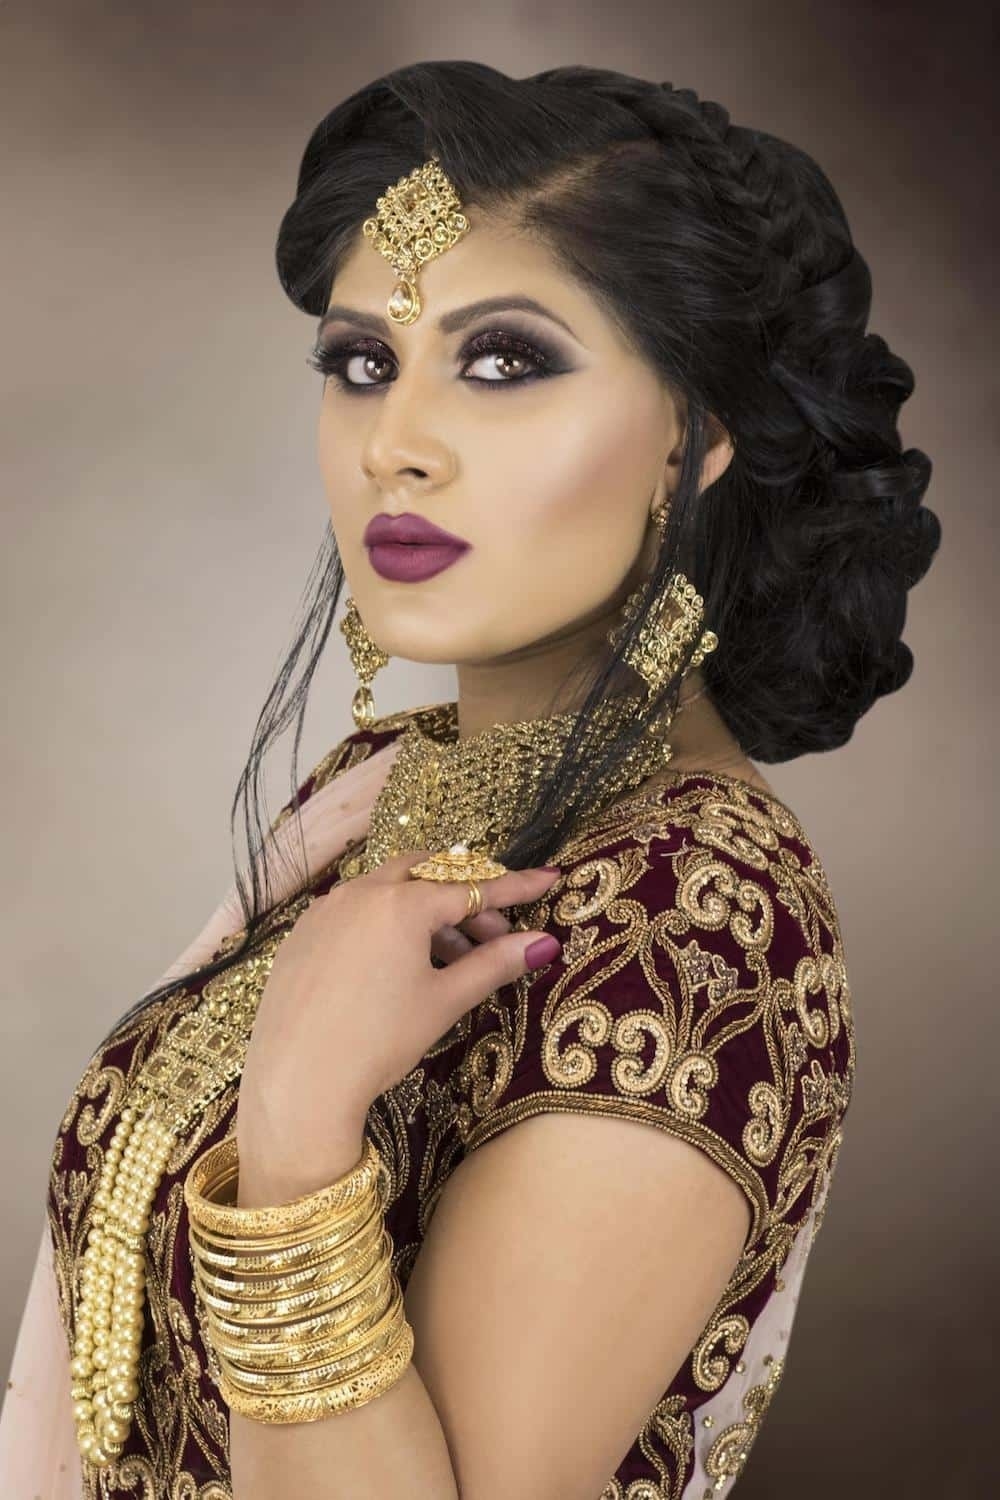 Asian Bridal Makeup Courses &amp;amp; Hair Courses - London - Indian / Pakistani with Asian Wedding Hairstyles 2018